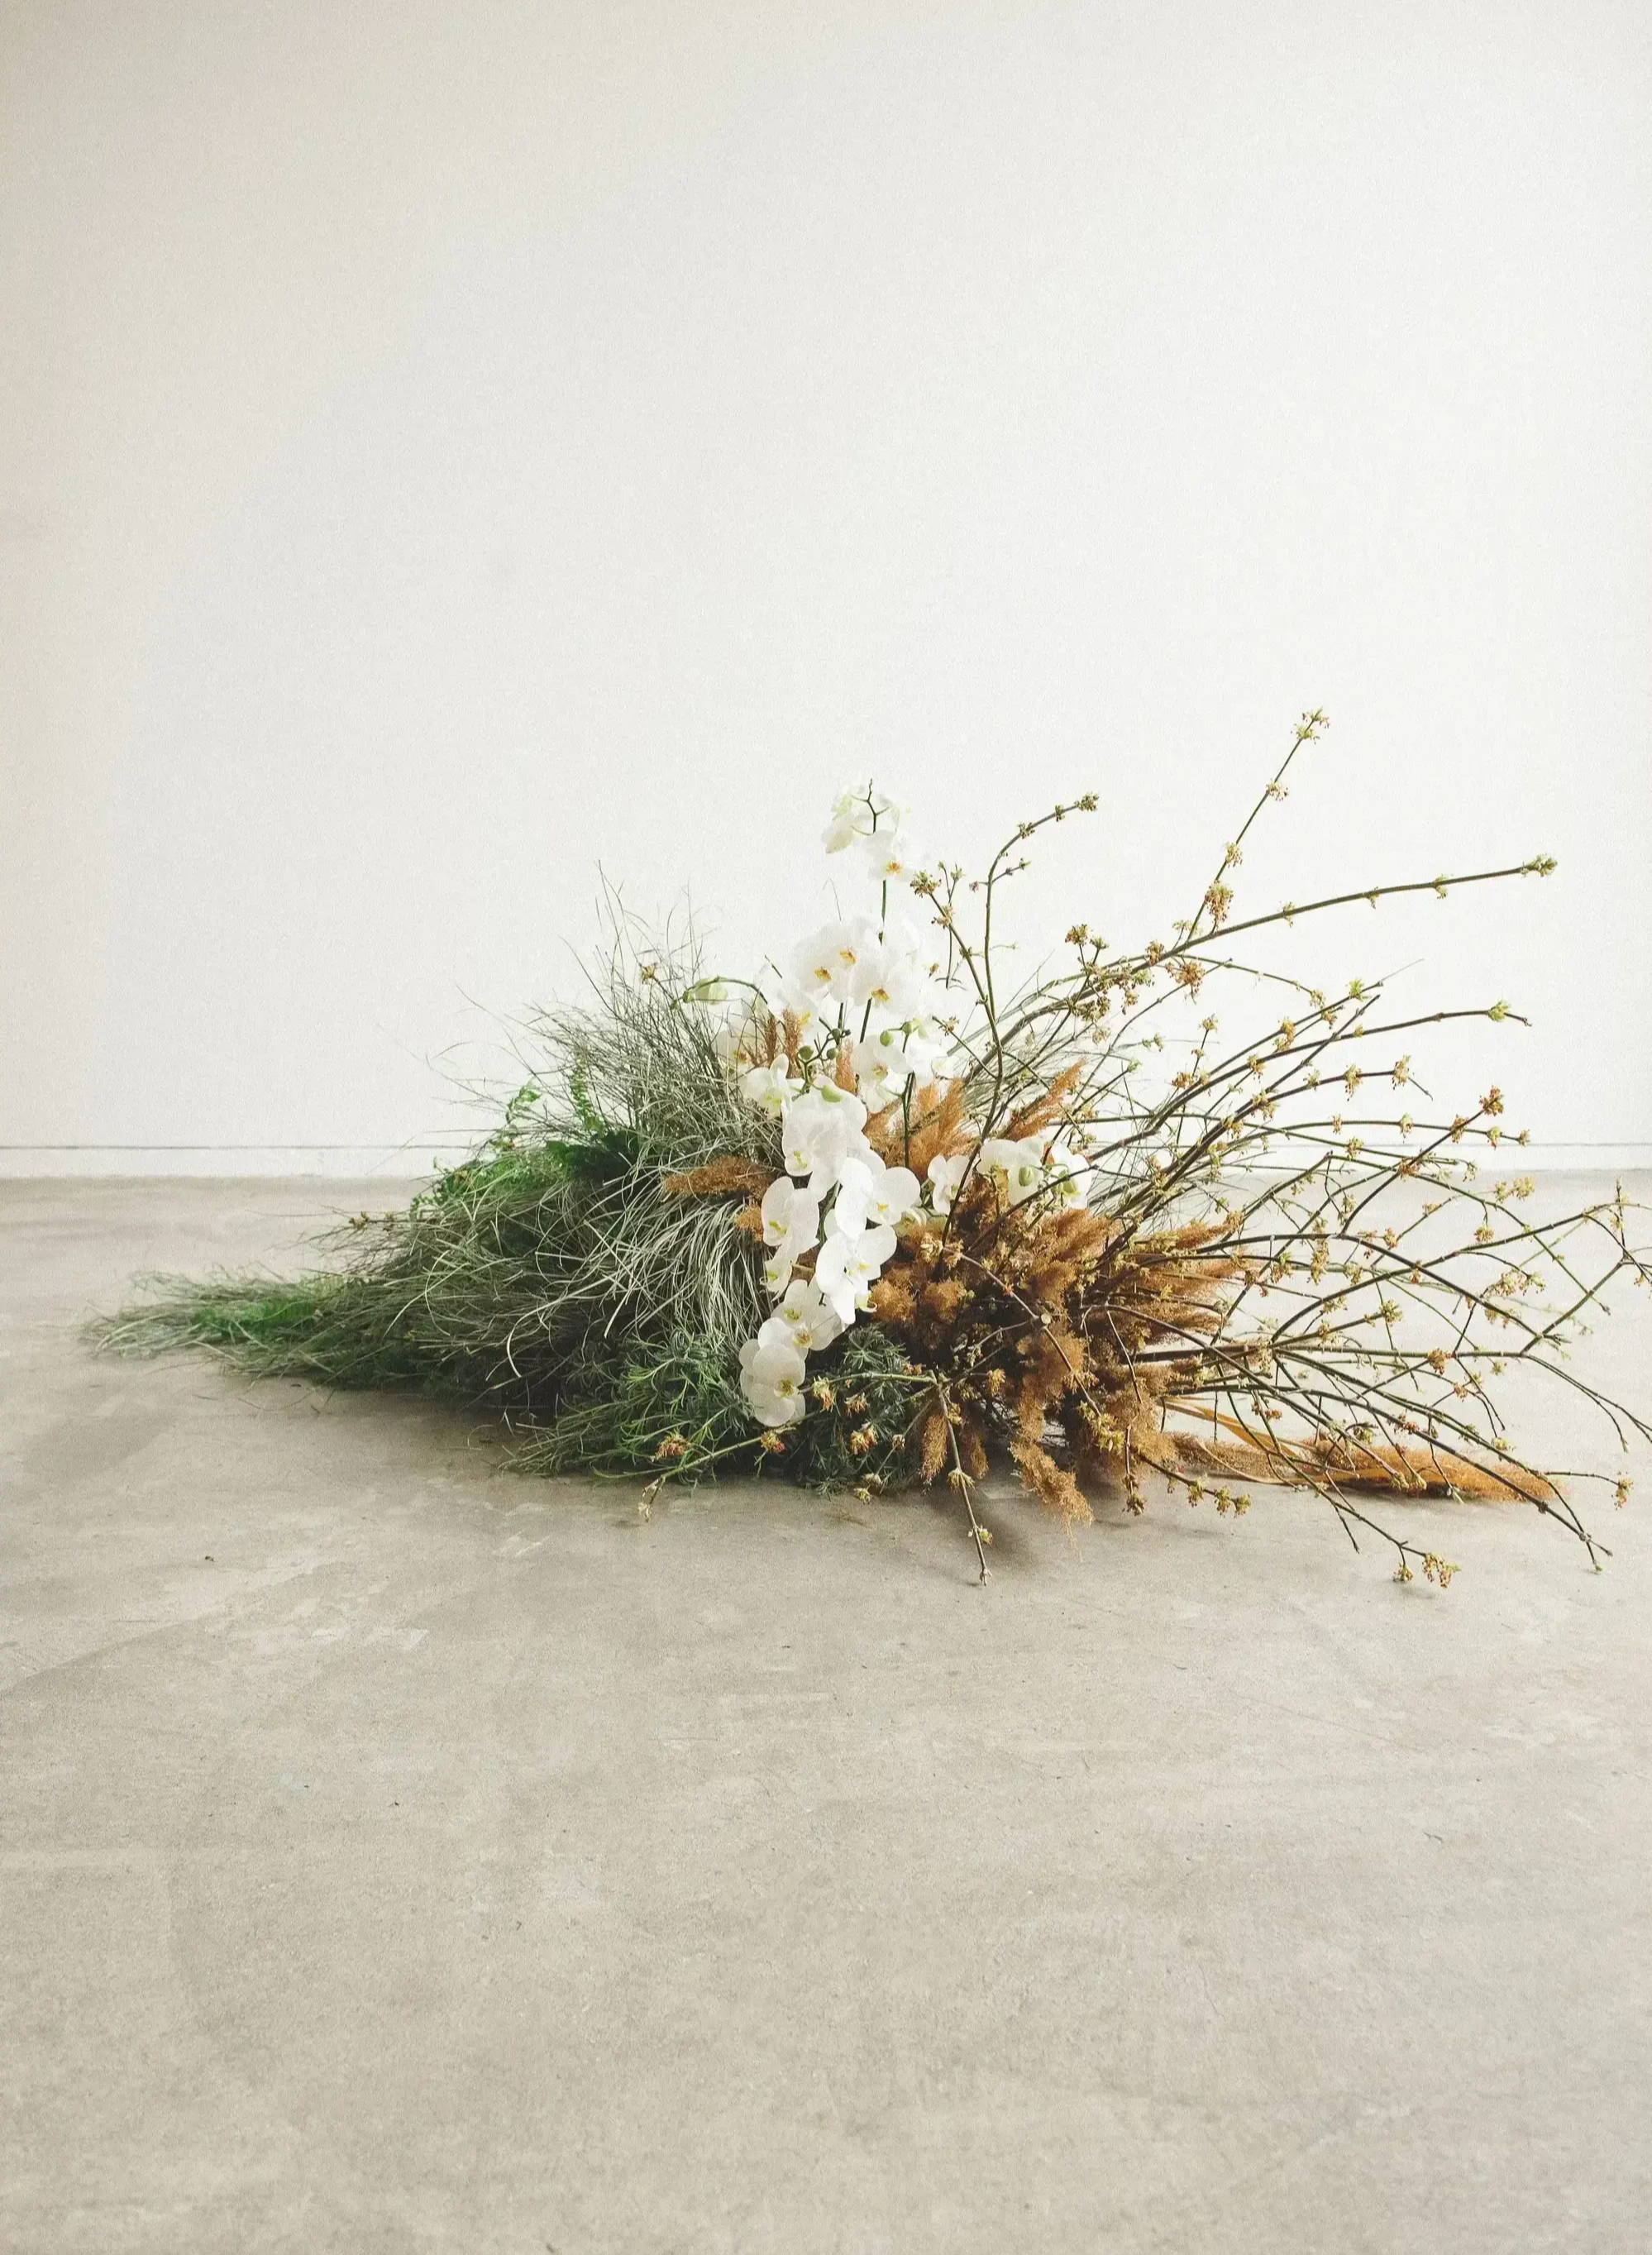 dried grass and twig installation on floor with white orchids